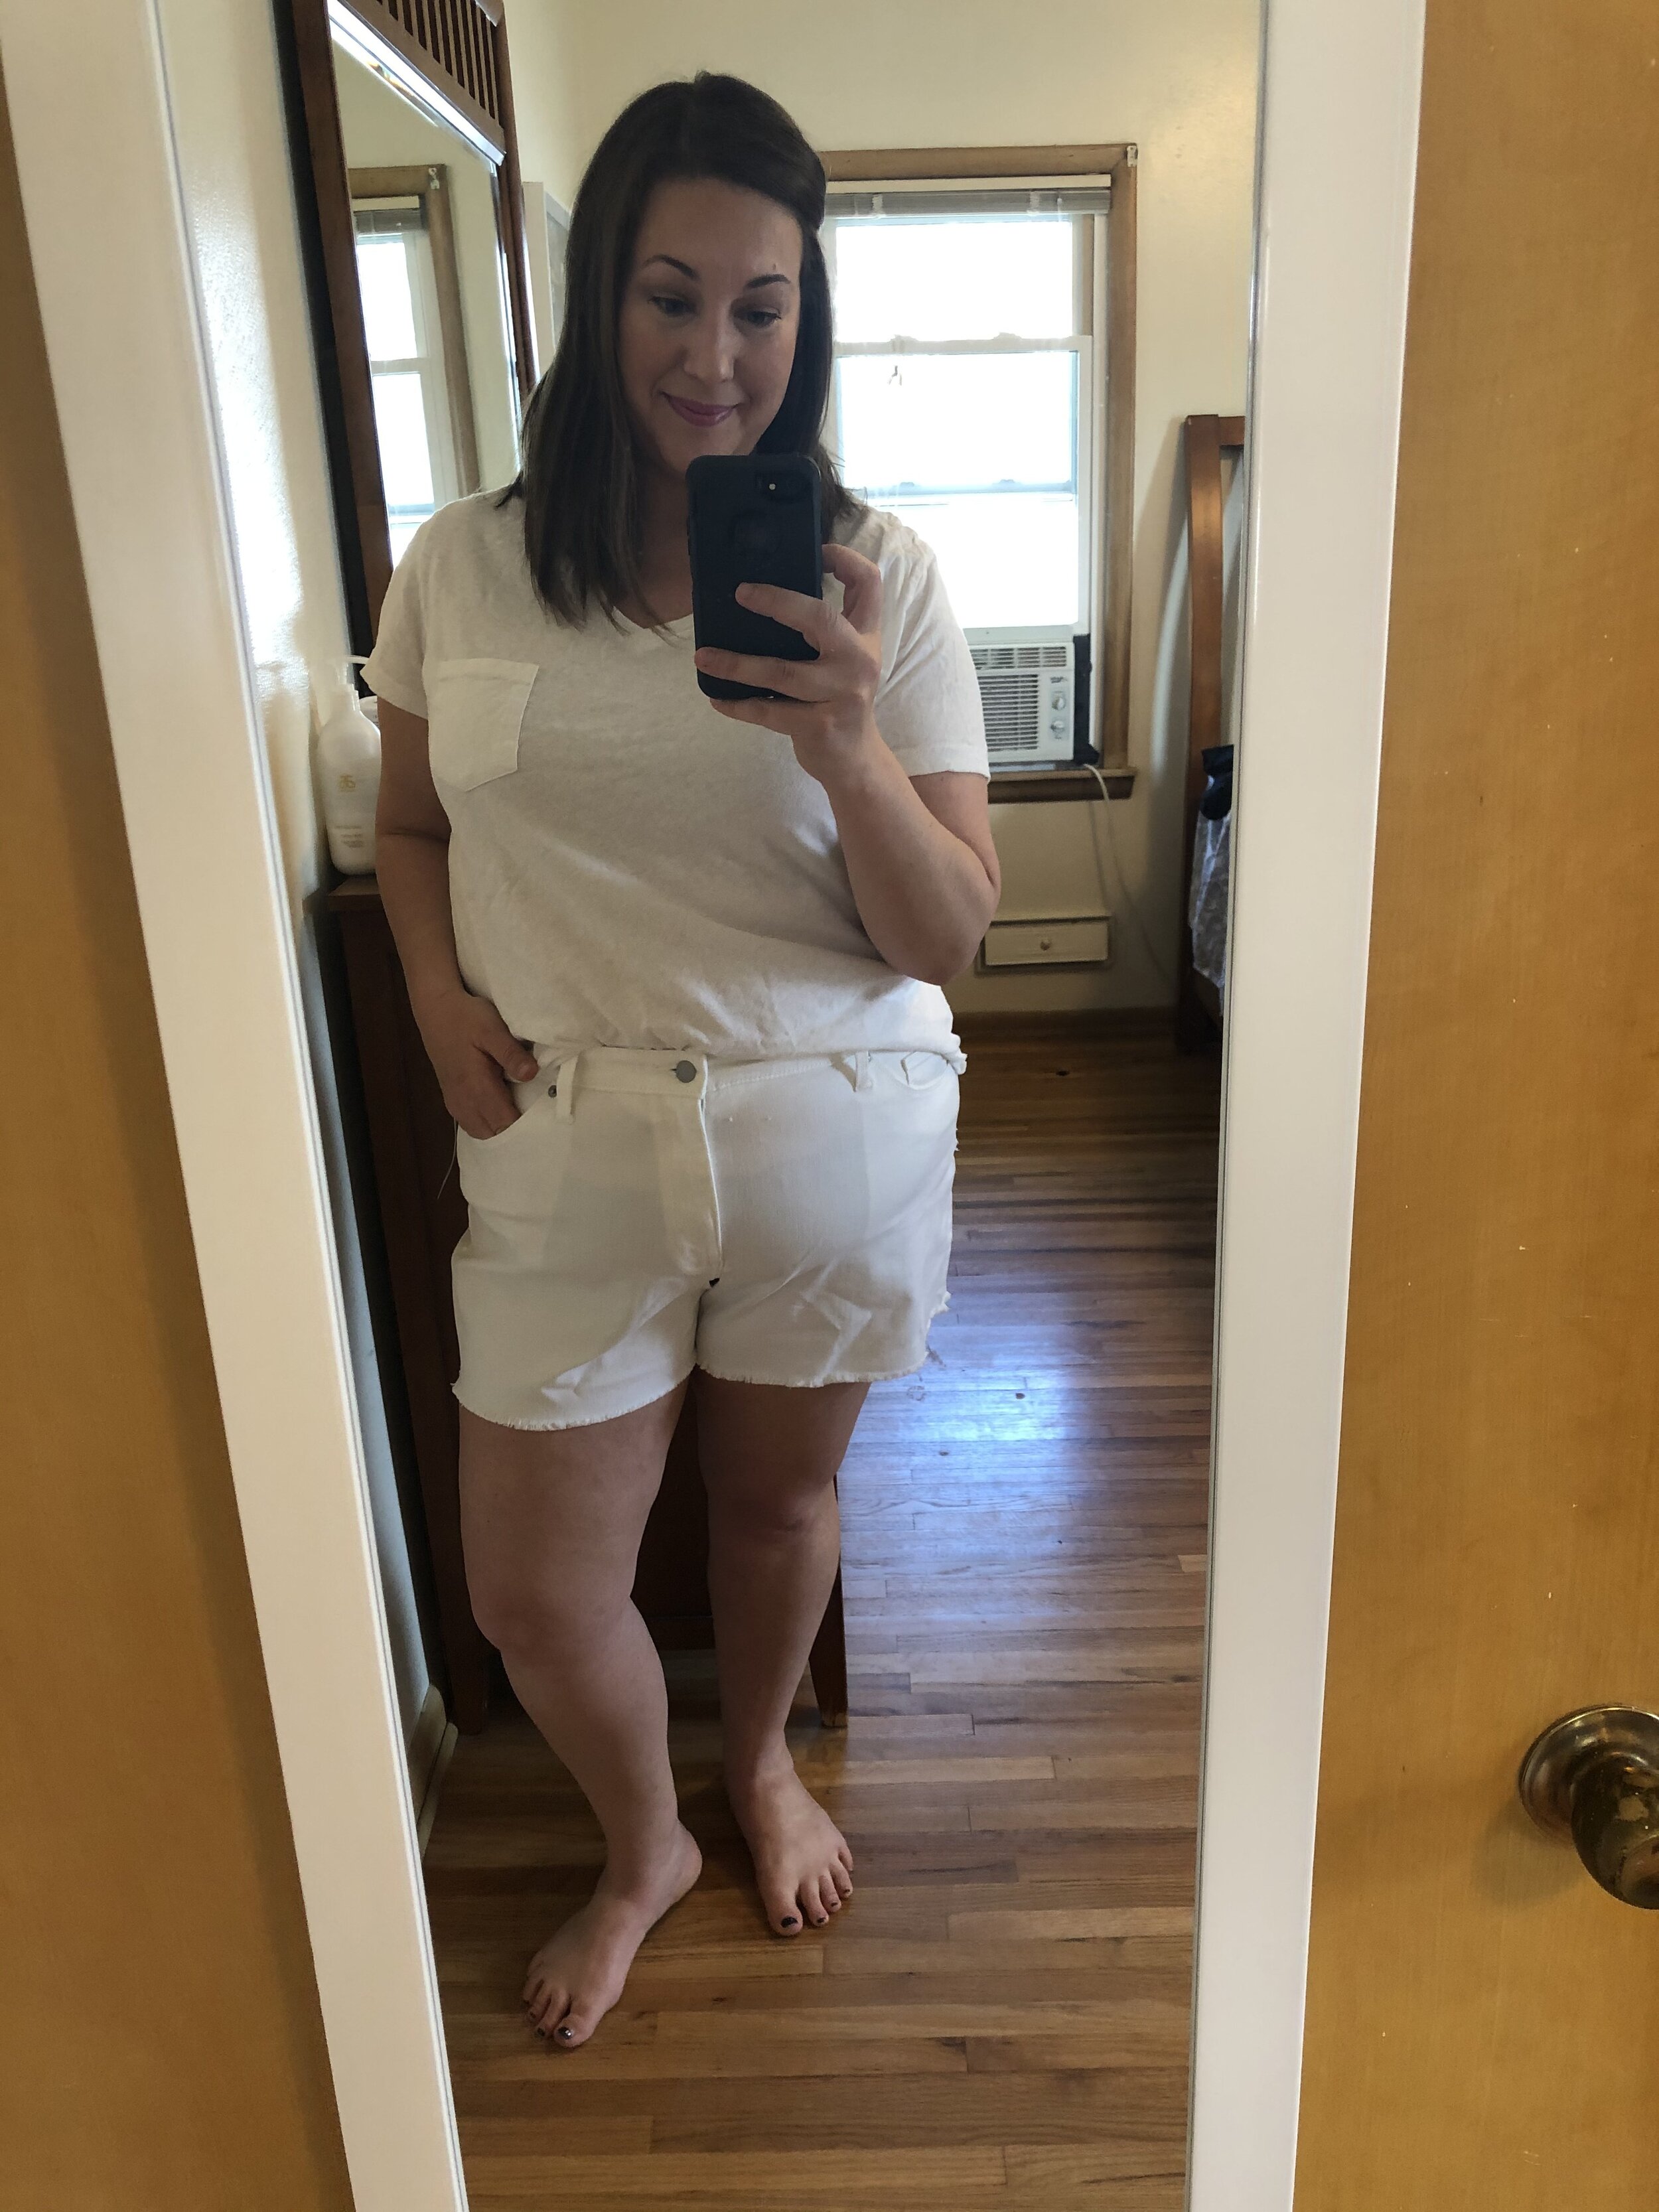 Target Shorts Try-On Spring 2020 — Fashion Fix